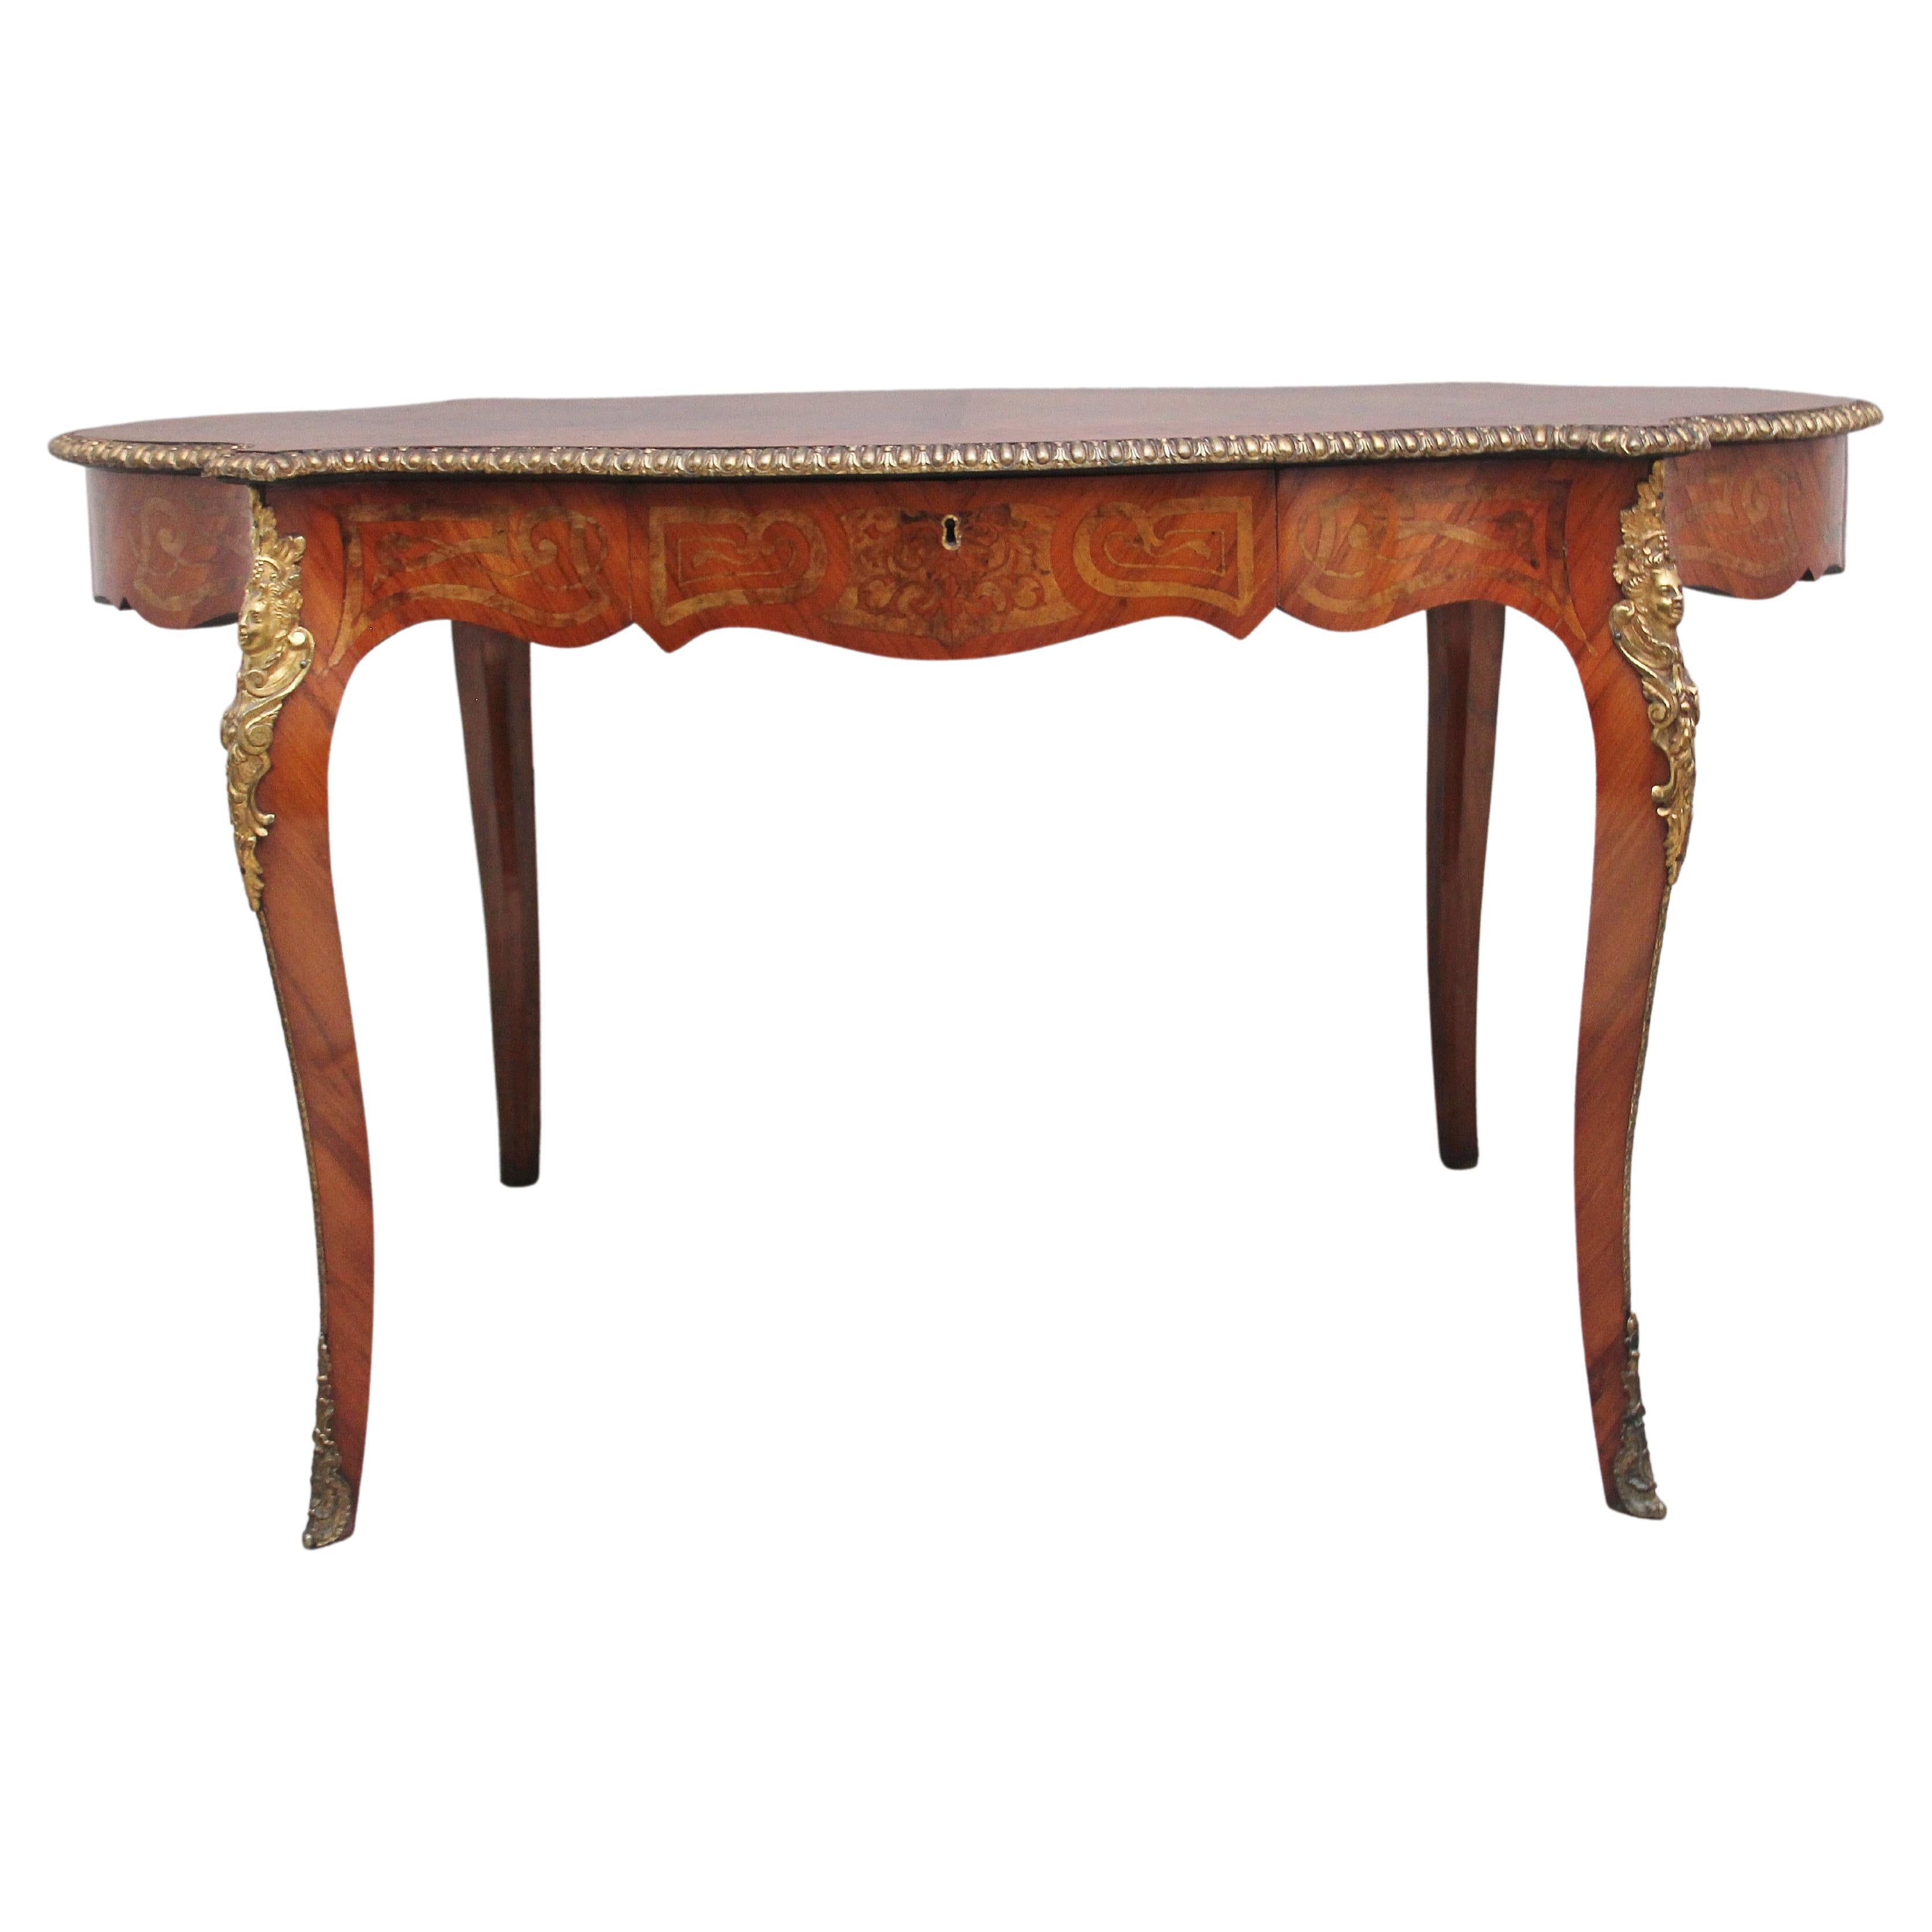 Superb Quality 19th Century Walnut and Inlaid Centre Table